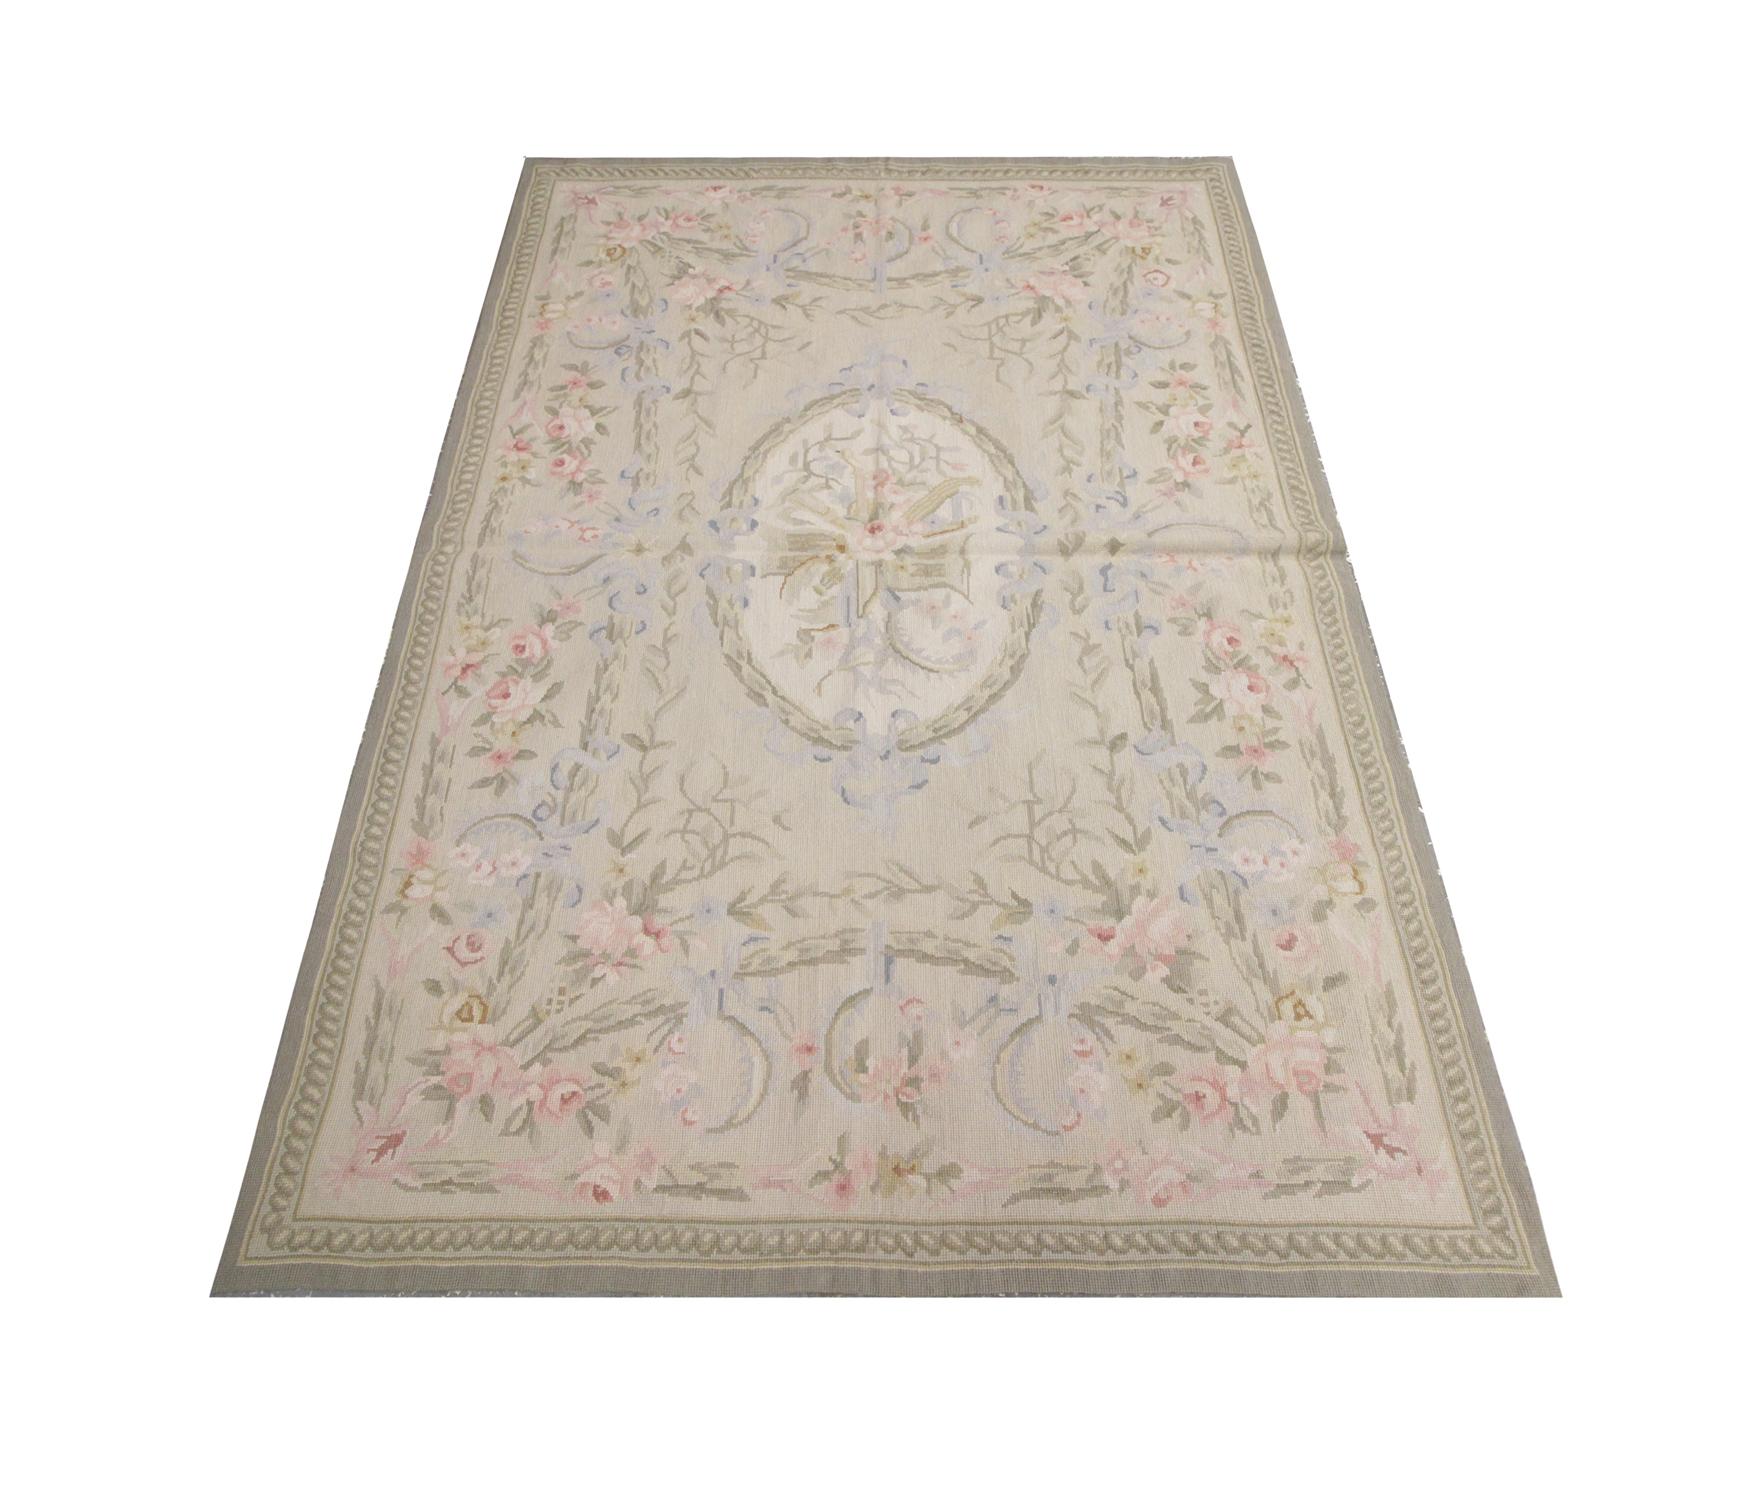 Delightful floral designs sweep across all sides of this high-quality vintage Aubusson rug. handwoven in 1990 with hand-spun, vegetable-dyed wool, and cotton, by some of the finest Caucasian artisans. Perfect for both modern or traditional